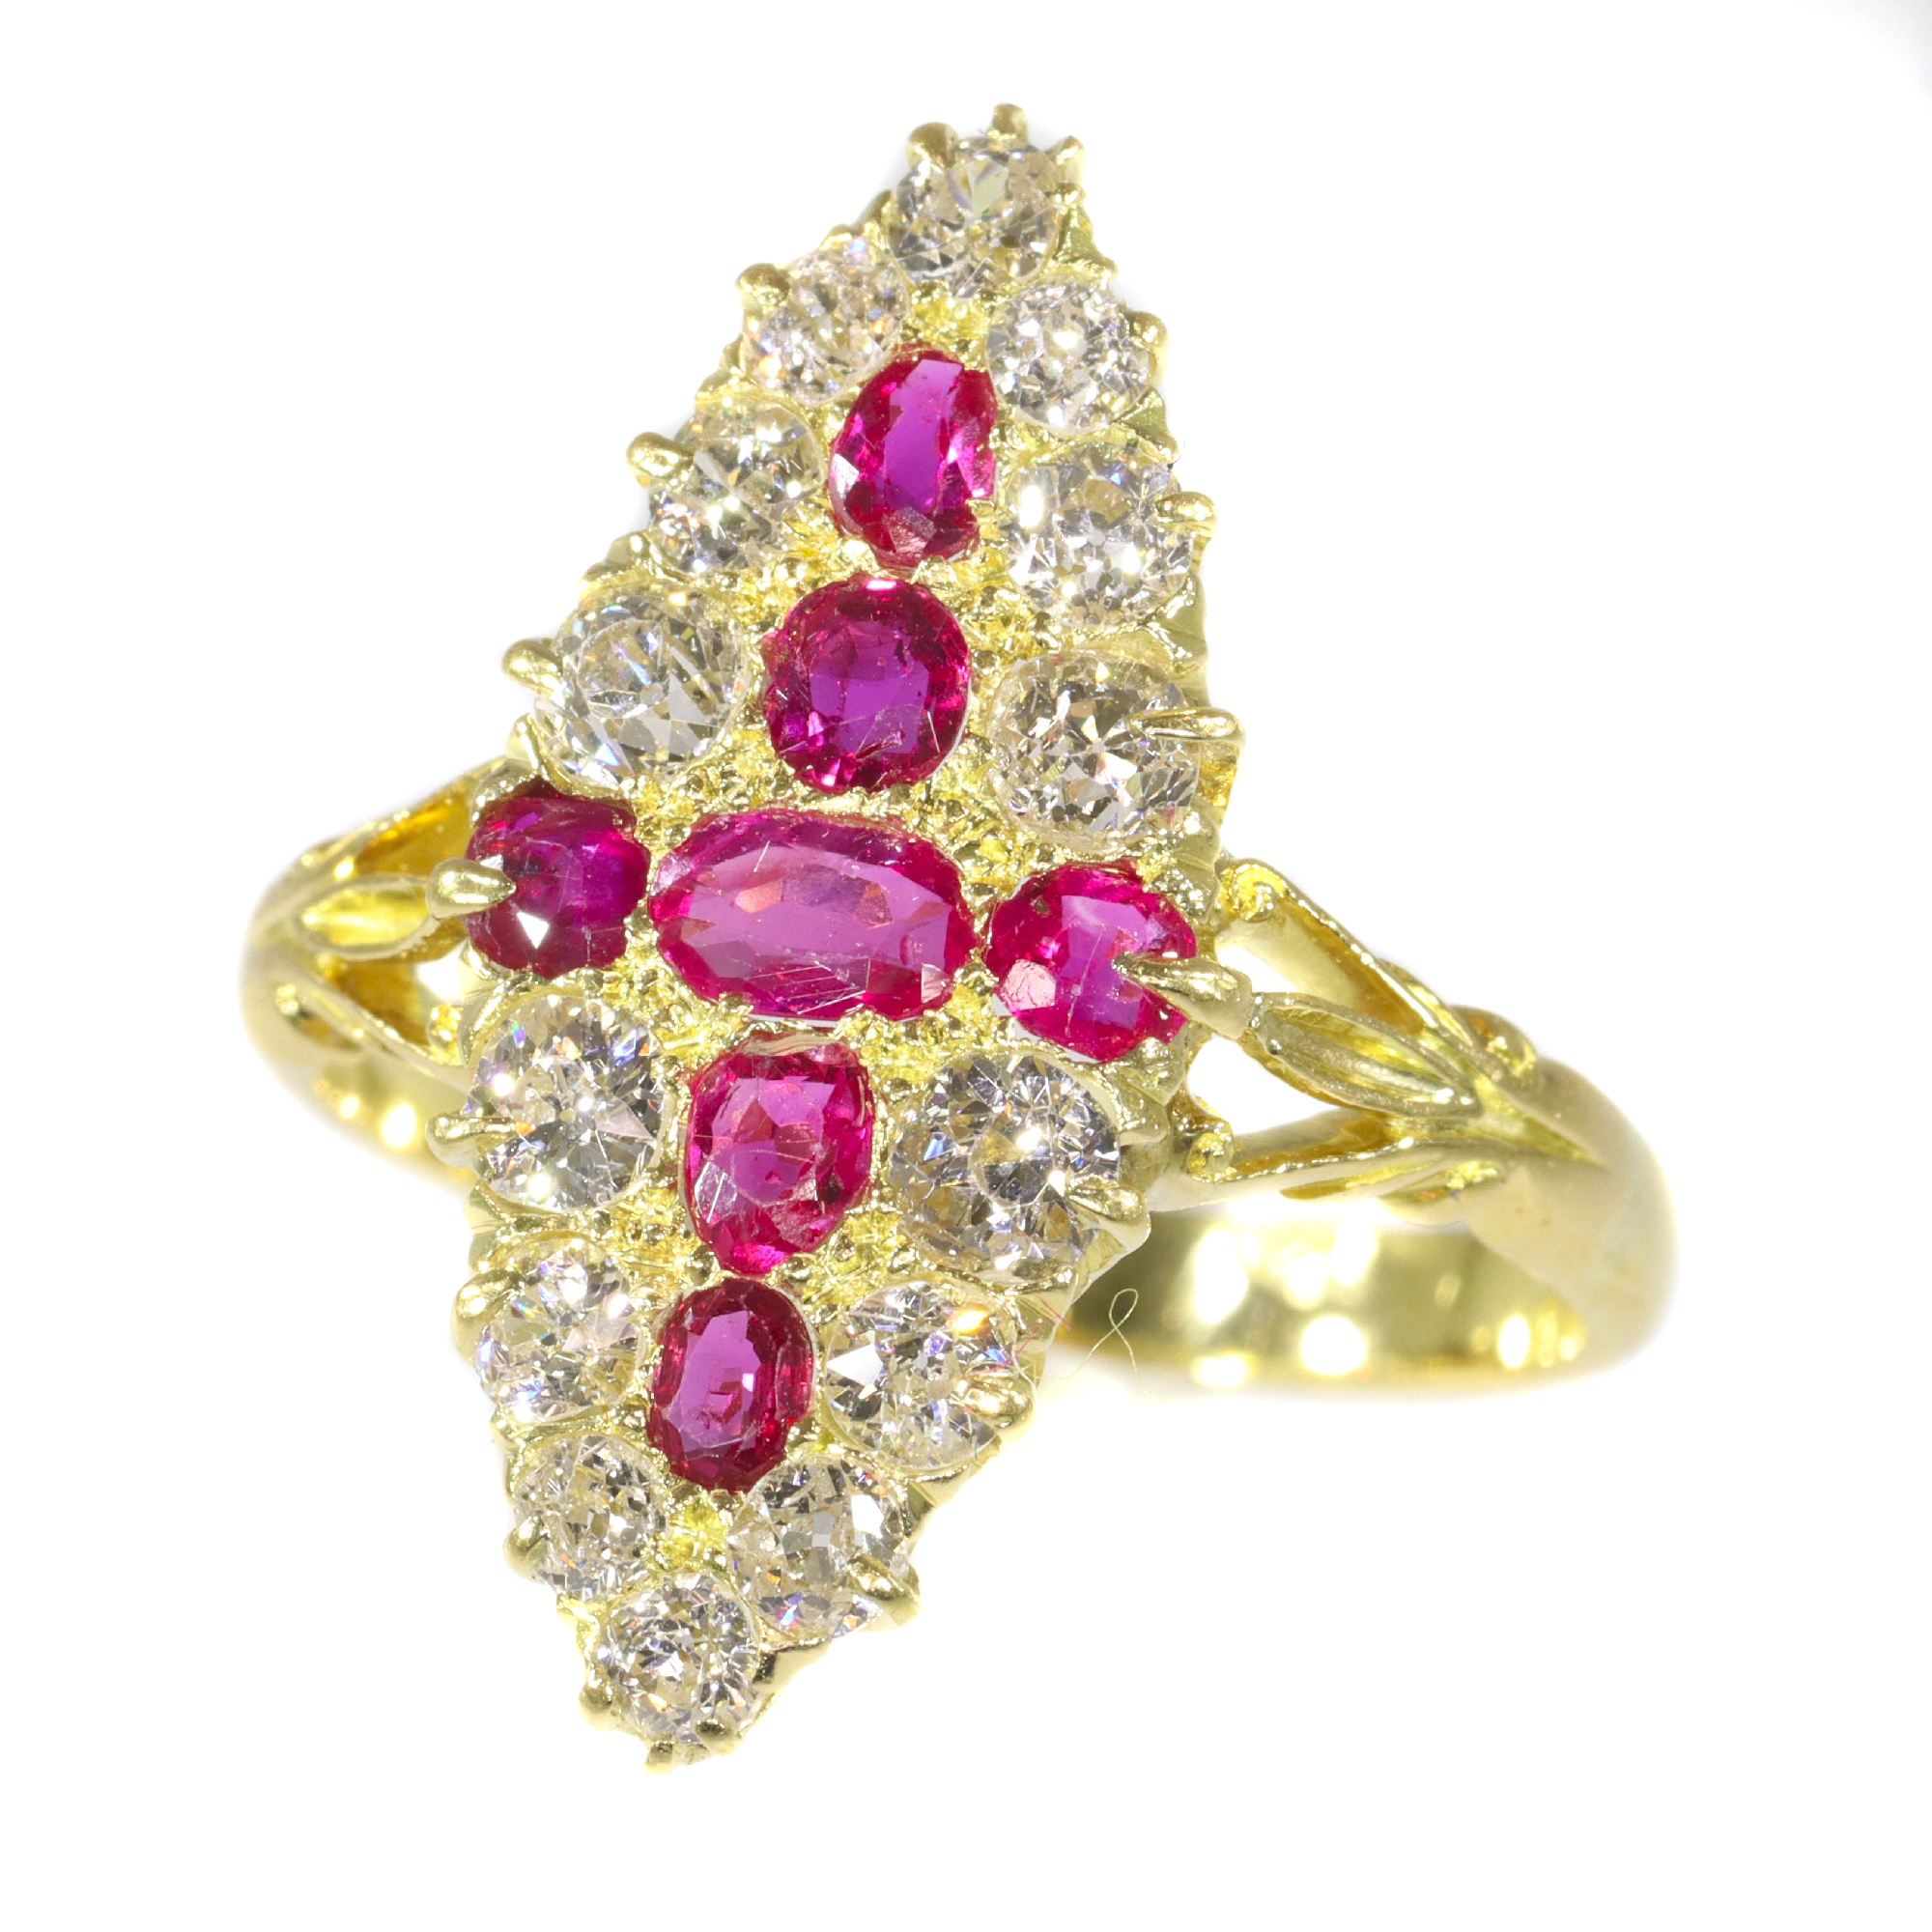 idee Huisdieren leer Antique Victorian gold ring set with old brilliant cut diamonds and rubies  sold by Simons Jewellers The Hague & Amsterdam: Description by Adin Antique  Jewelry.